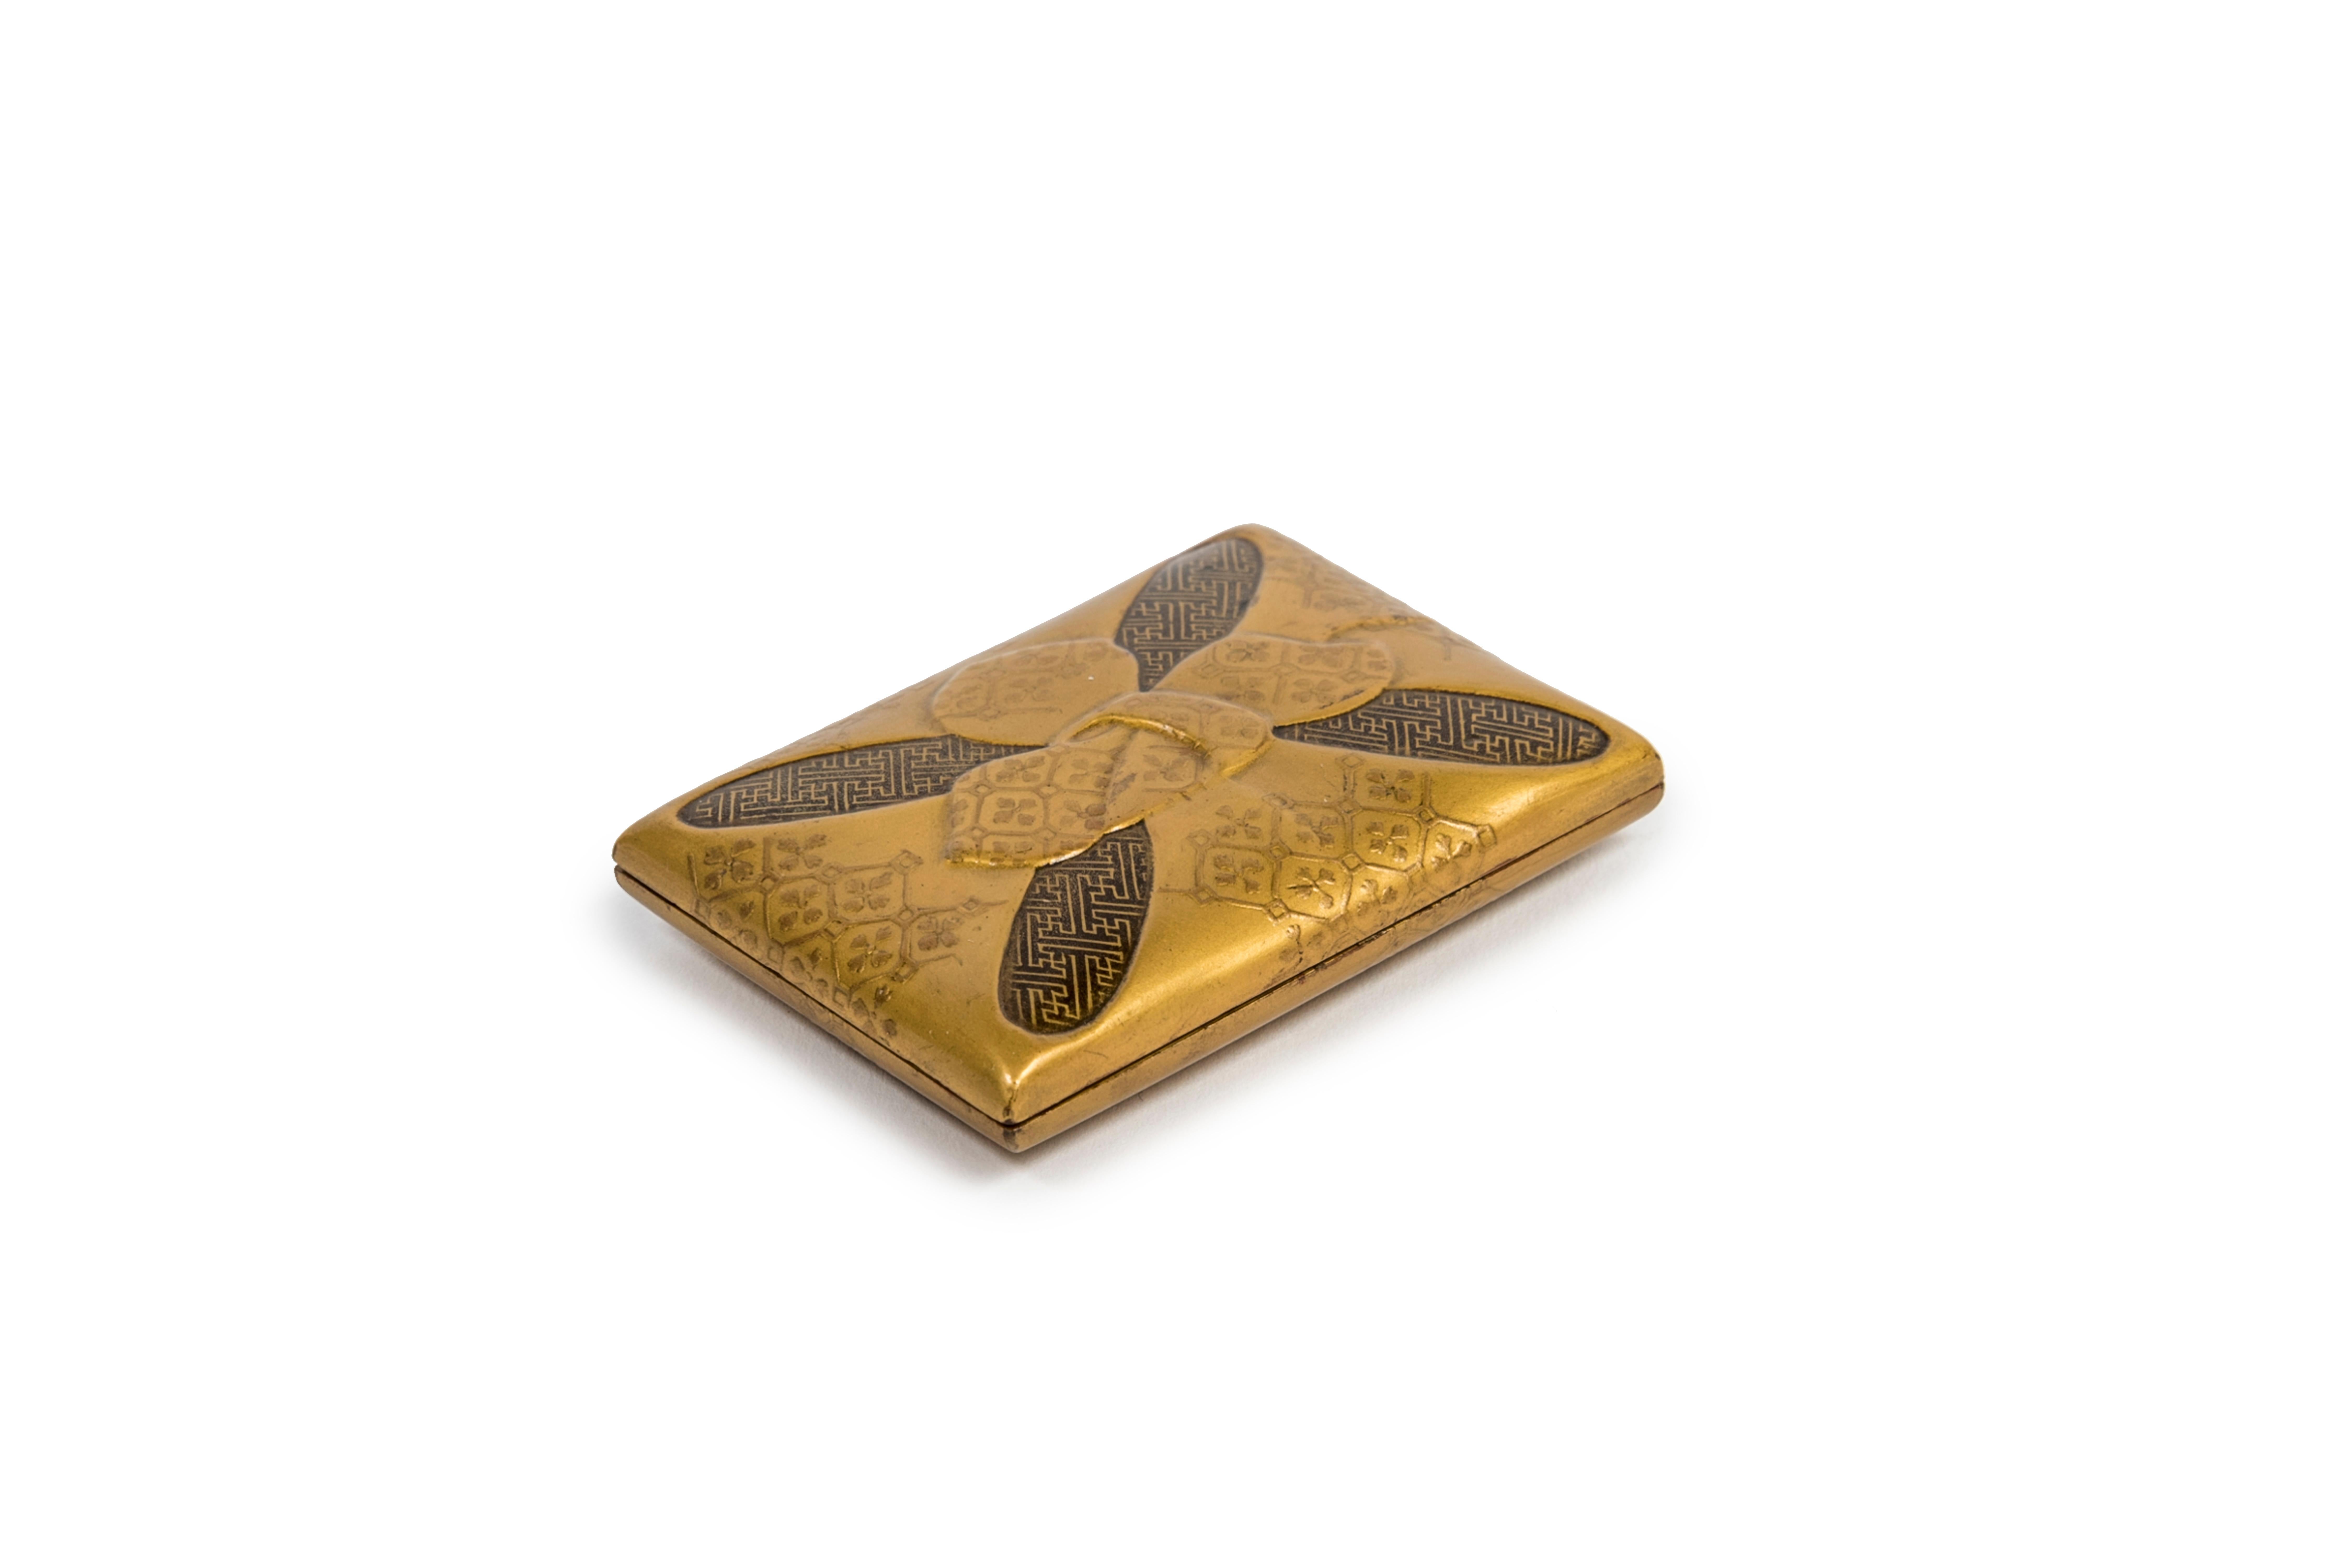 Rectangular and flat lacquer Kobako (small box) representing a furoshiki knot seen from above. Fundame background, furoshiki in takamaki-e with floral pattern, inside the folds of the fabric with black and gold sayagata pattern with togidashi maki-e